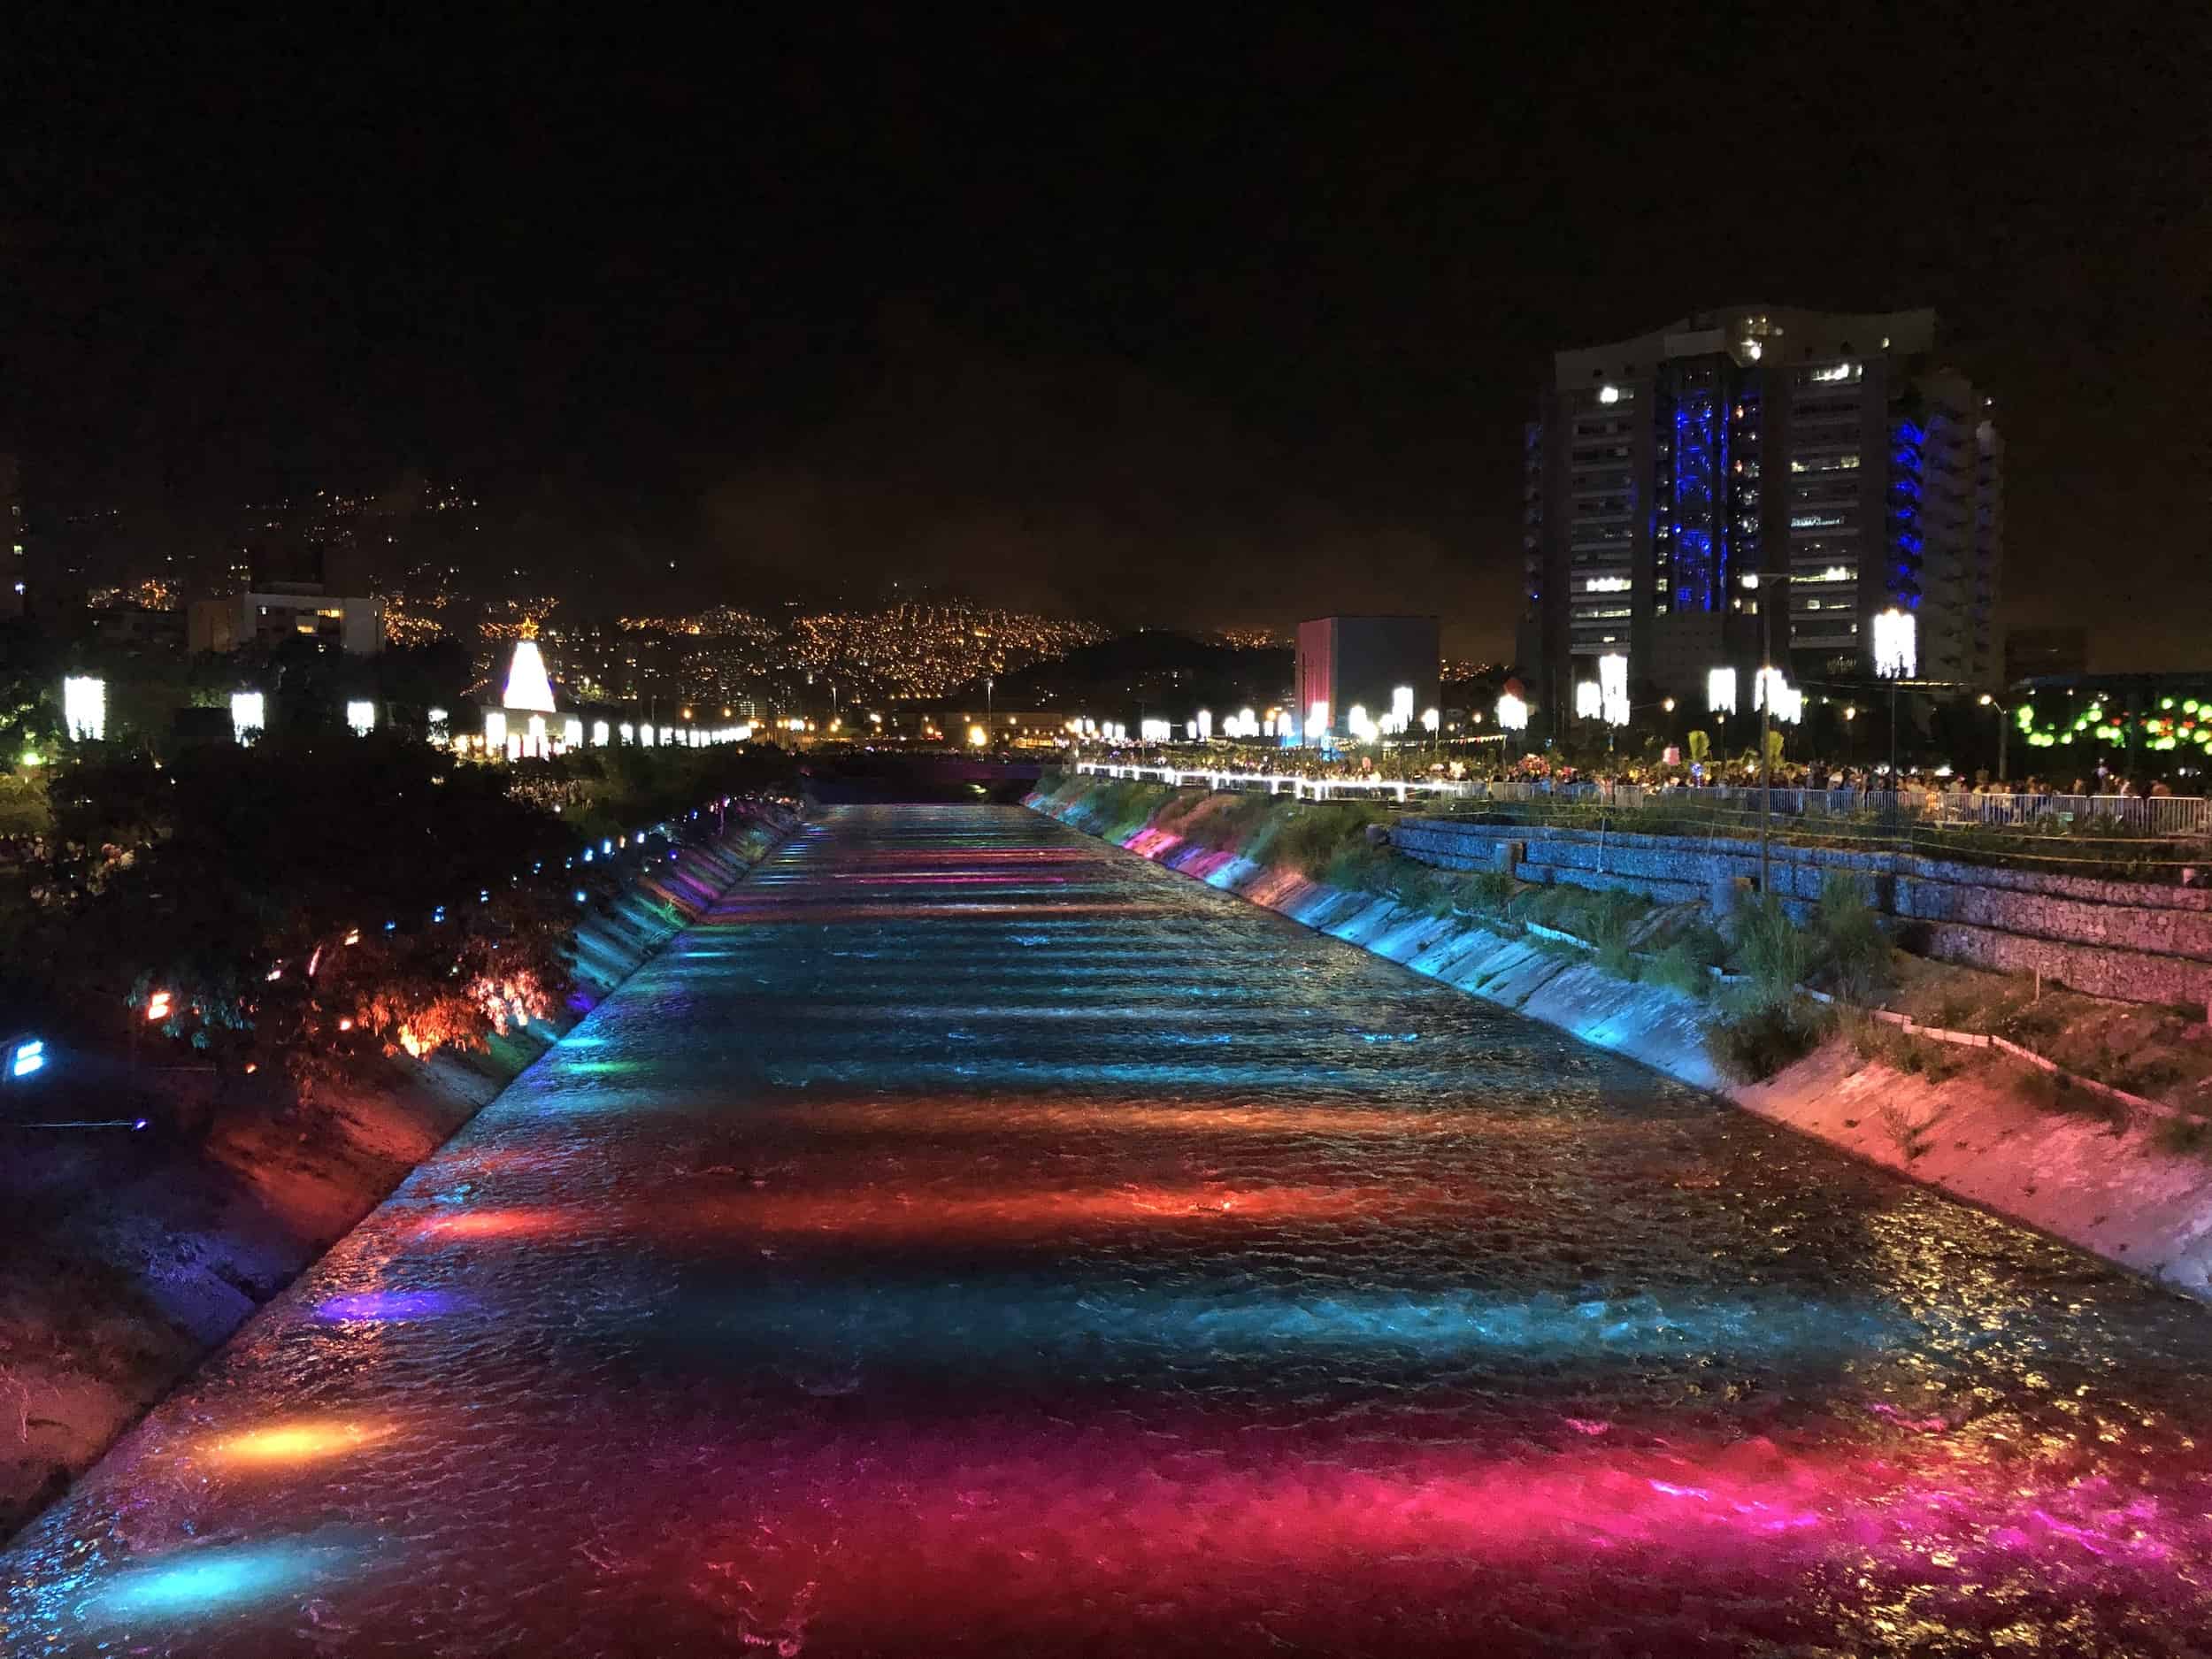 The Medellín River lit up at night during Christmas at Medellín River Parks in Medellín, Antioquia, Colombia